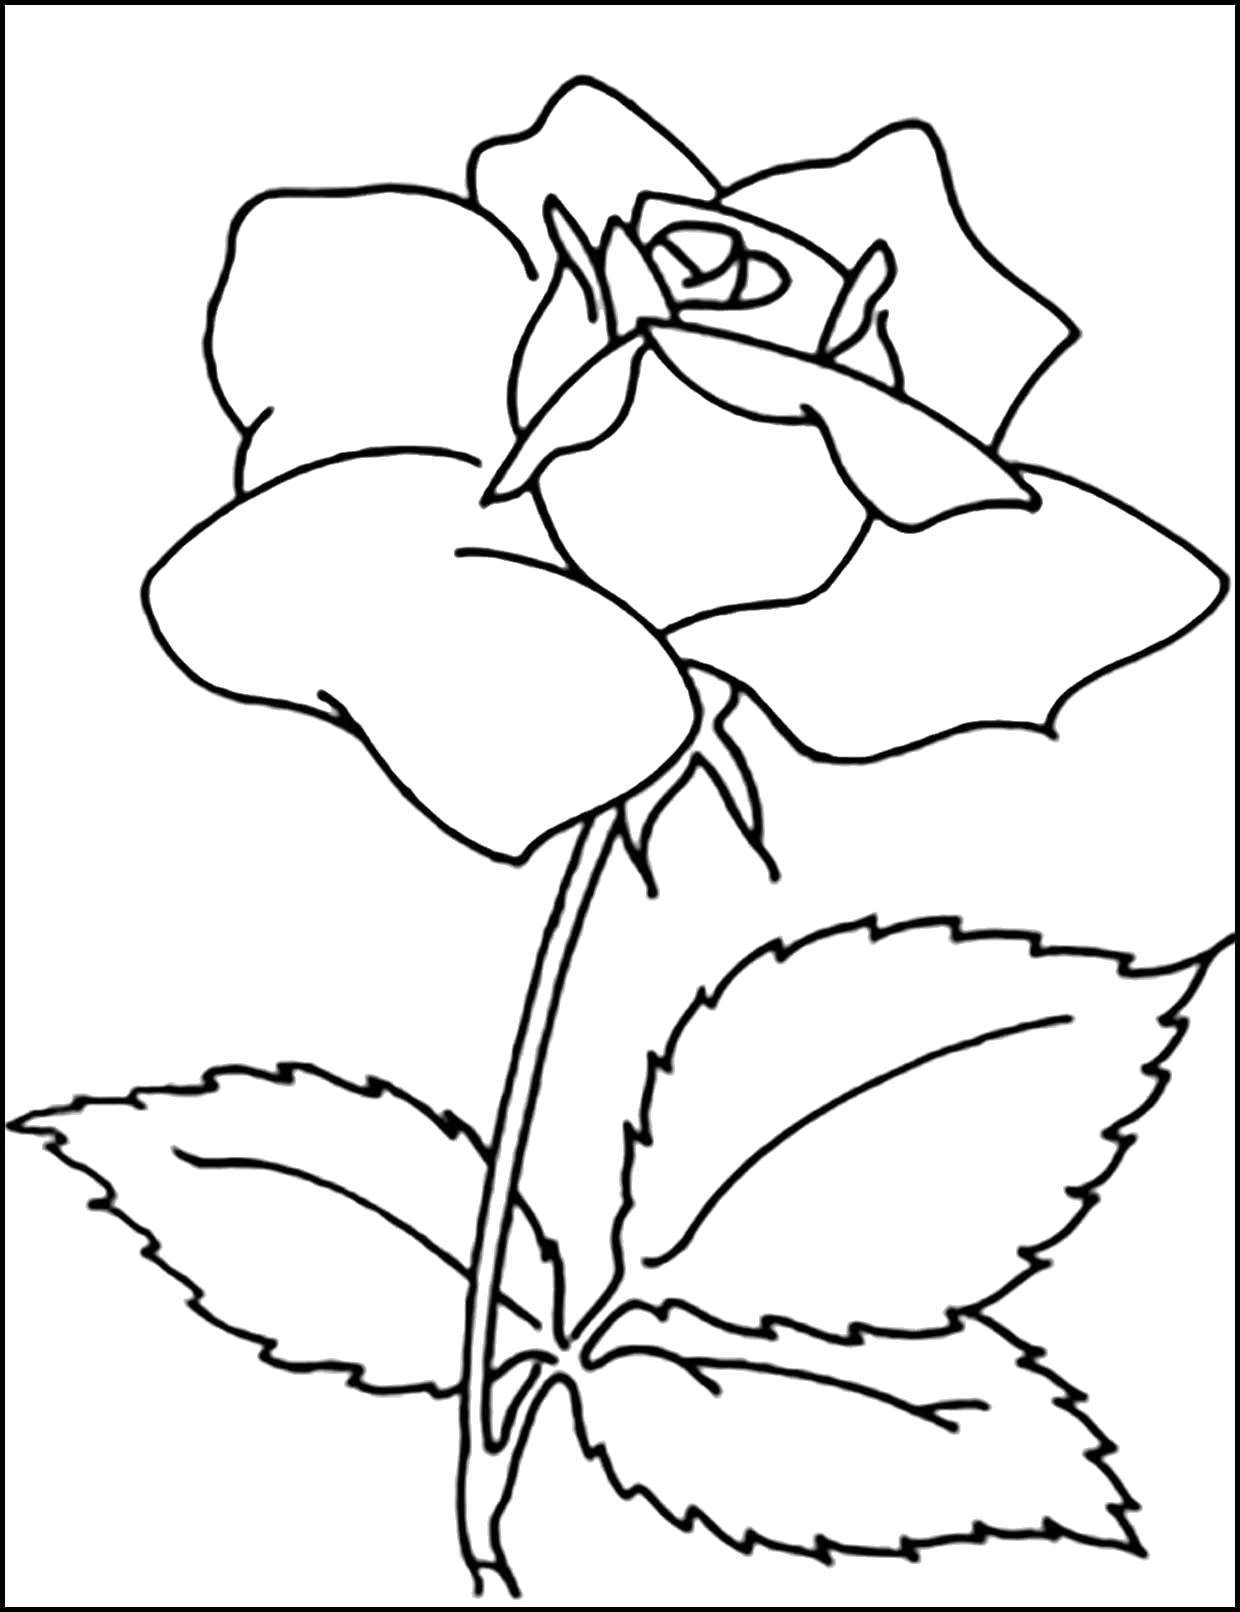 Coloring Rose. Category flowers. Tags:  Flowers, roses.